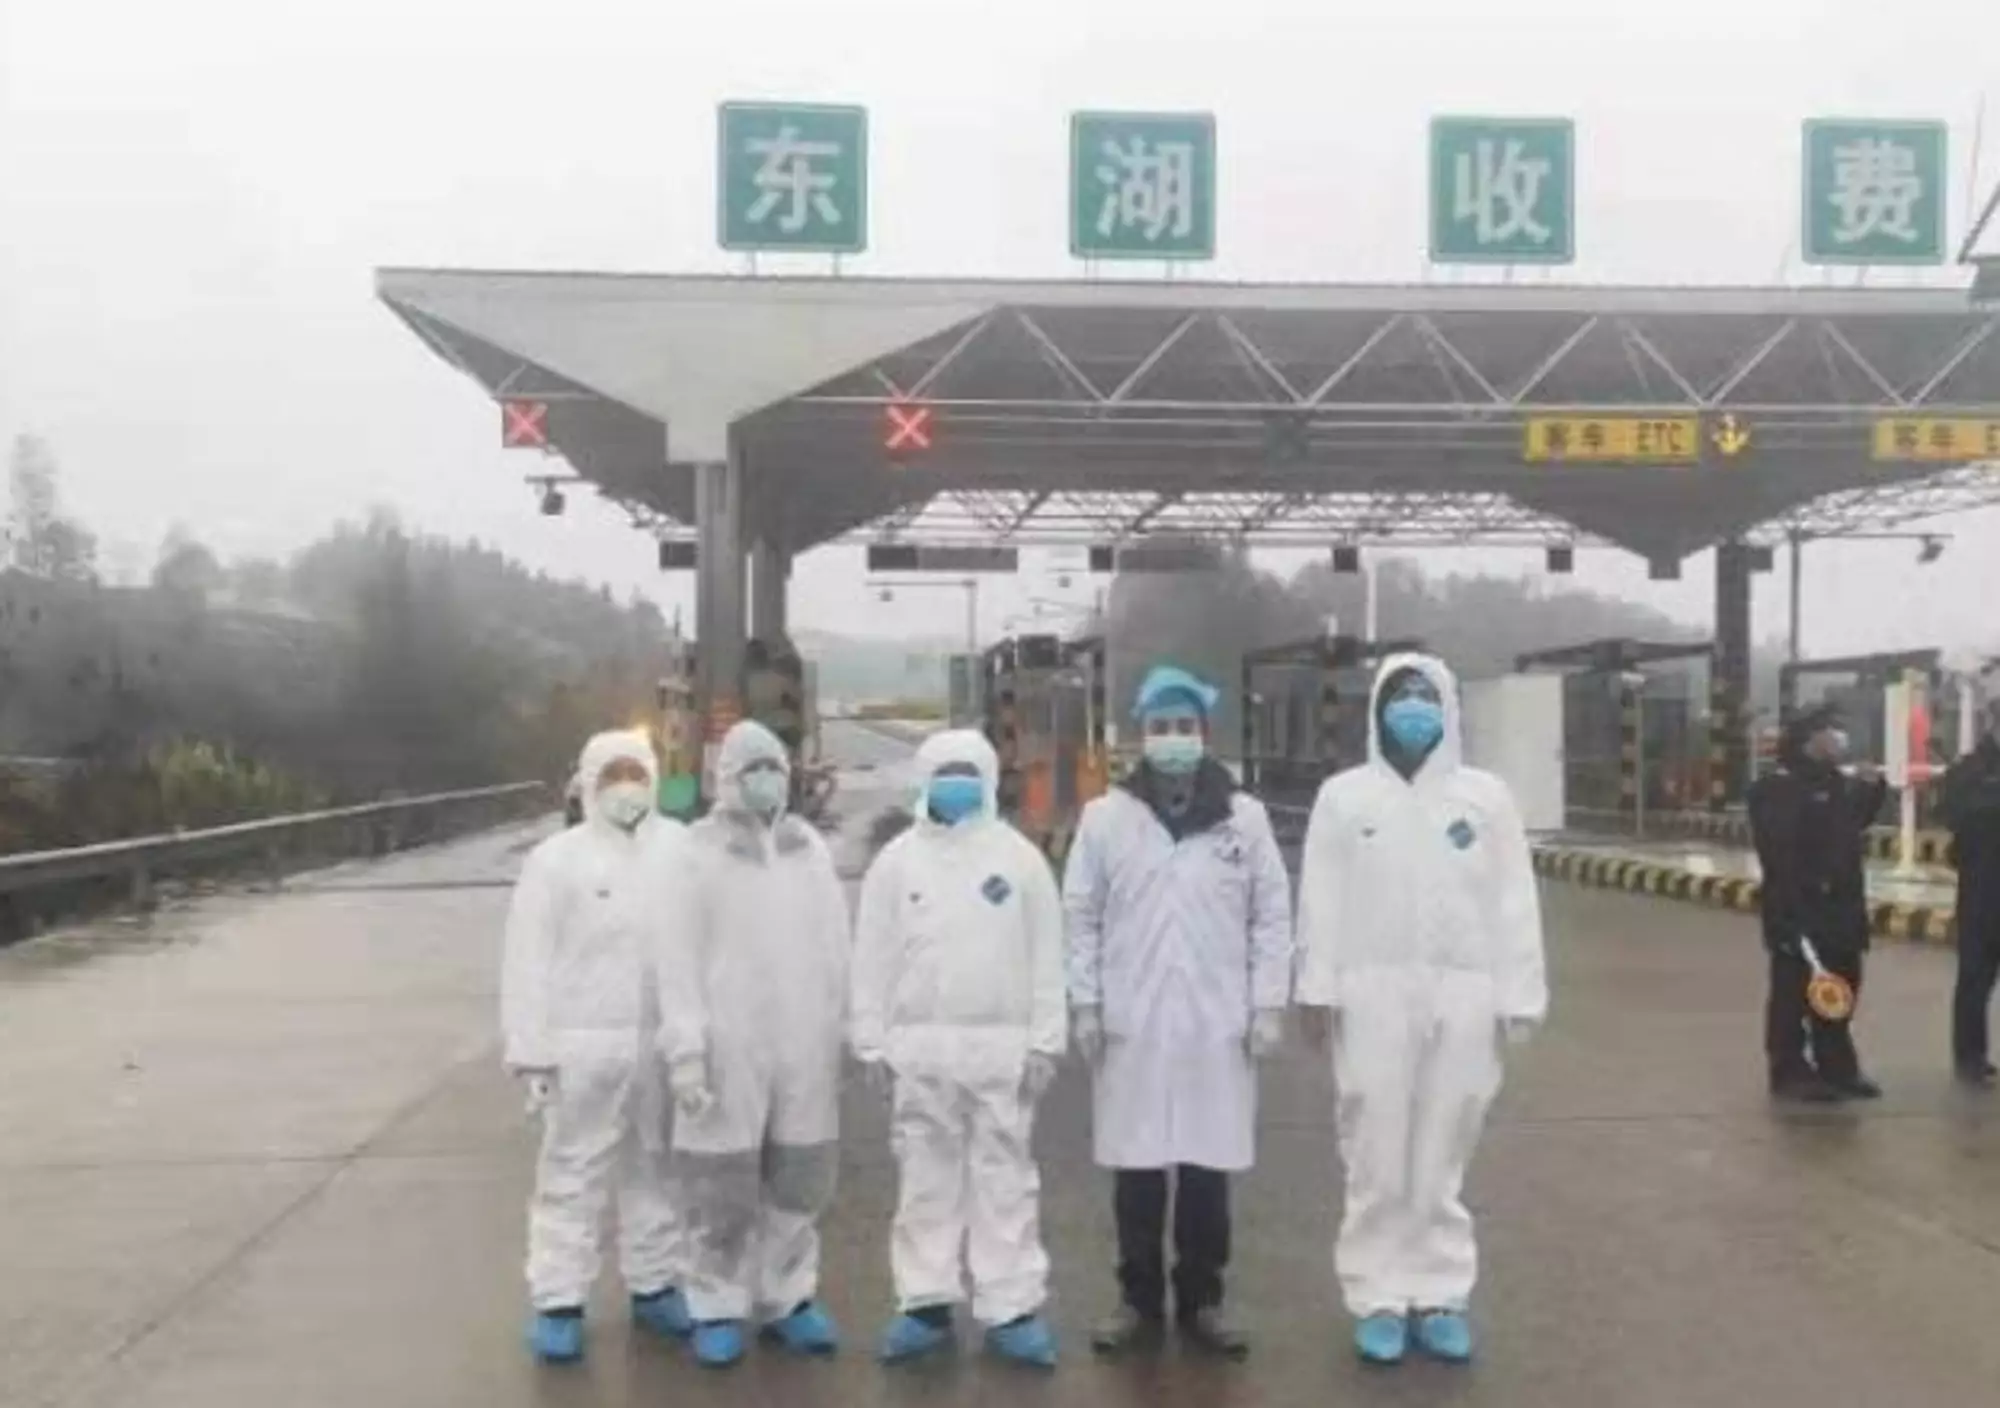 Song Yingjie with his colleagues in hazmat suits.